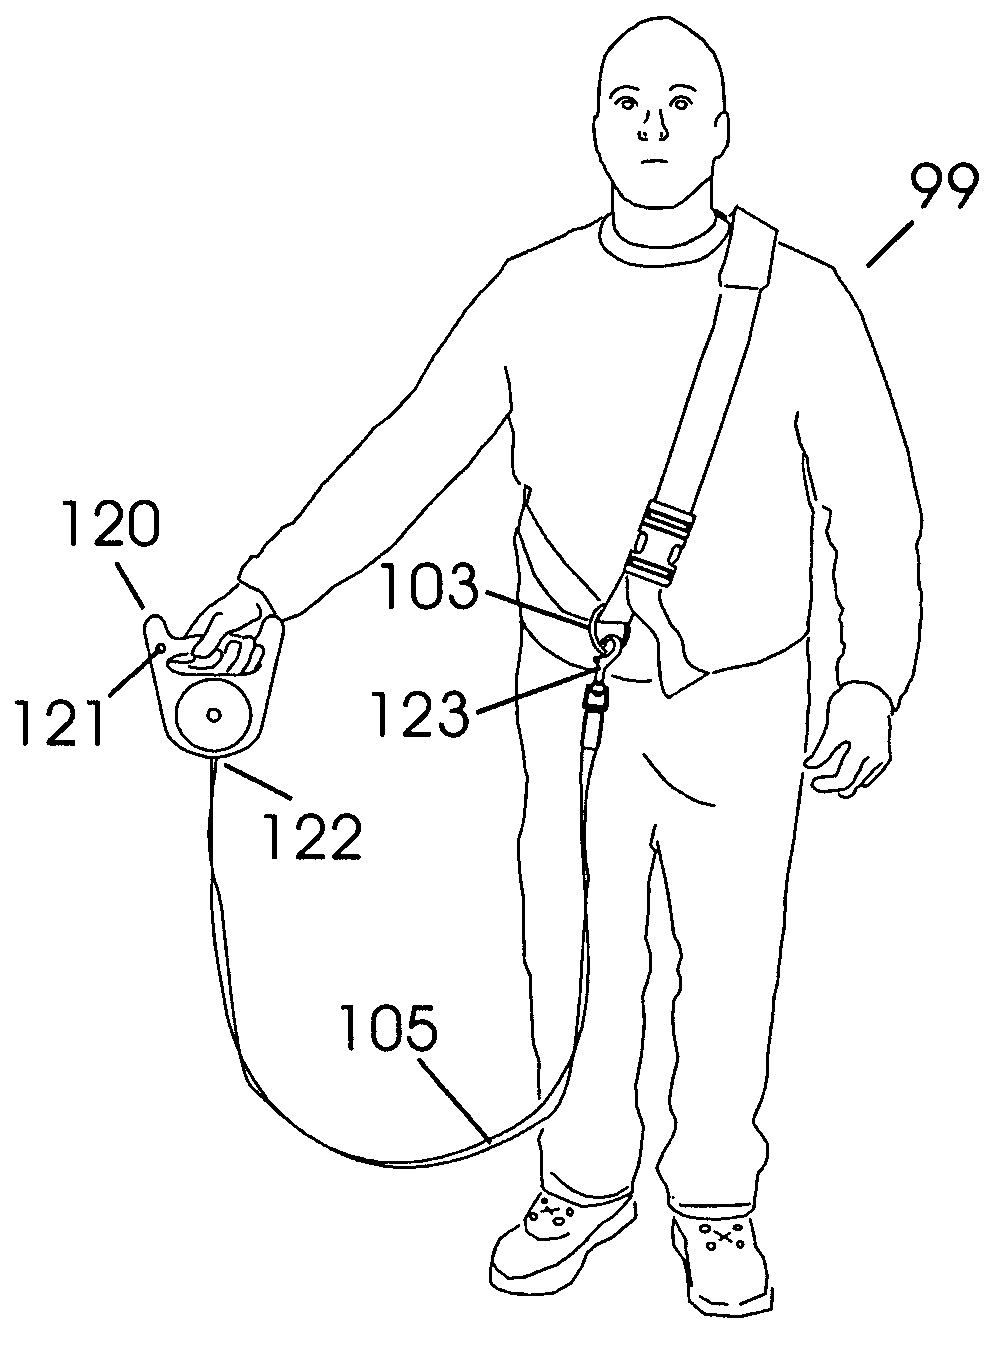 Machine and process for personal, side mounted biomechanically engineered lifting device; a device for lifting awkward and heavy loads